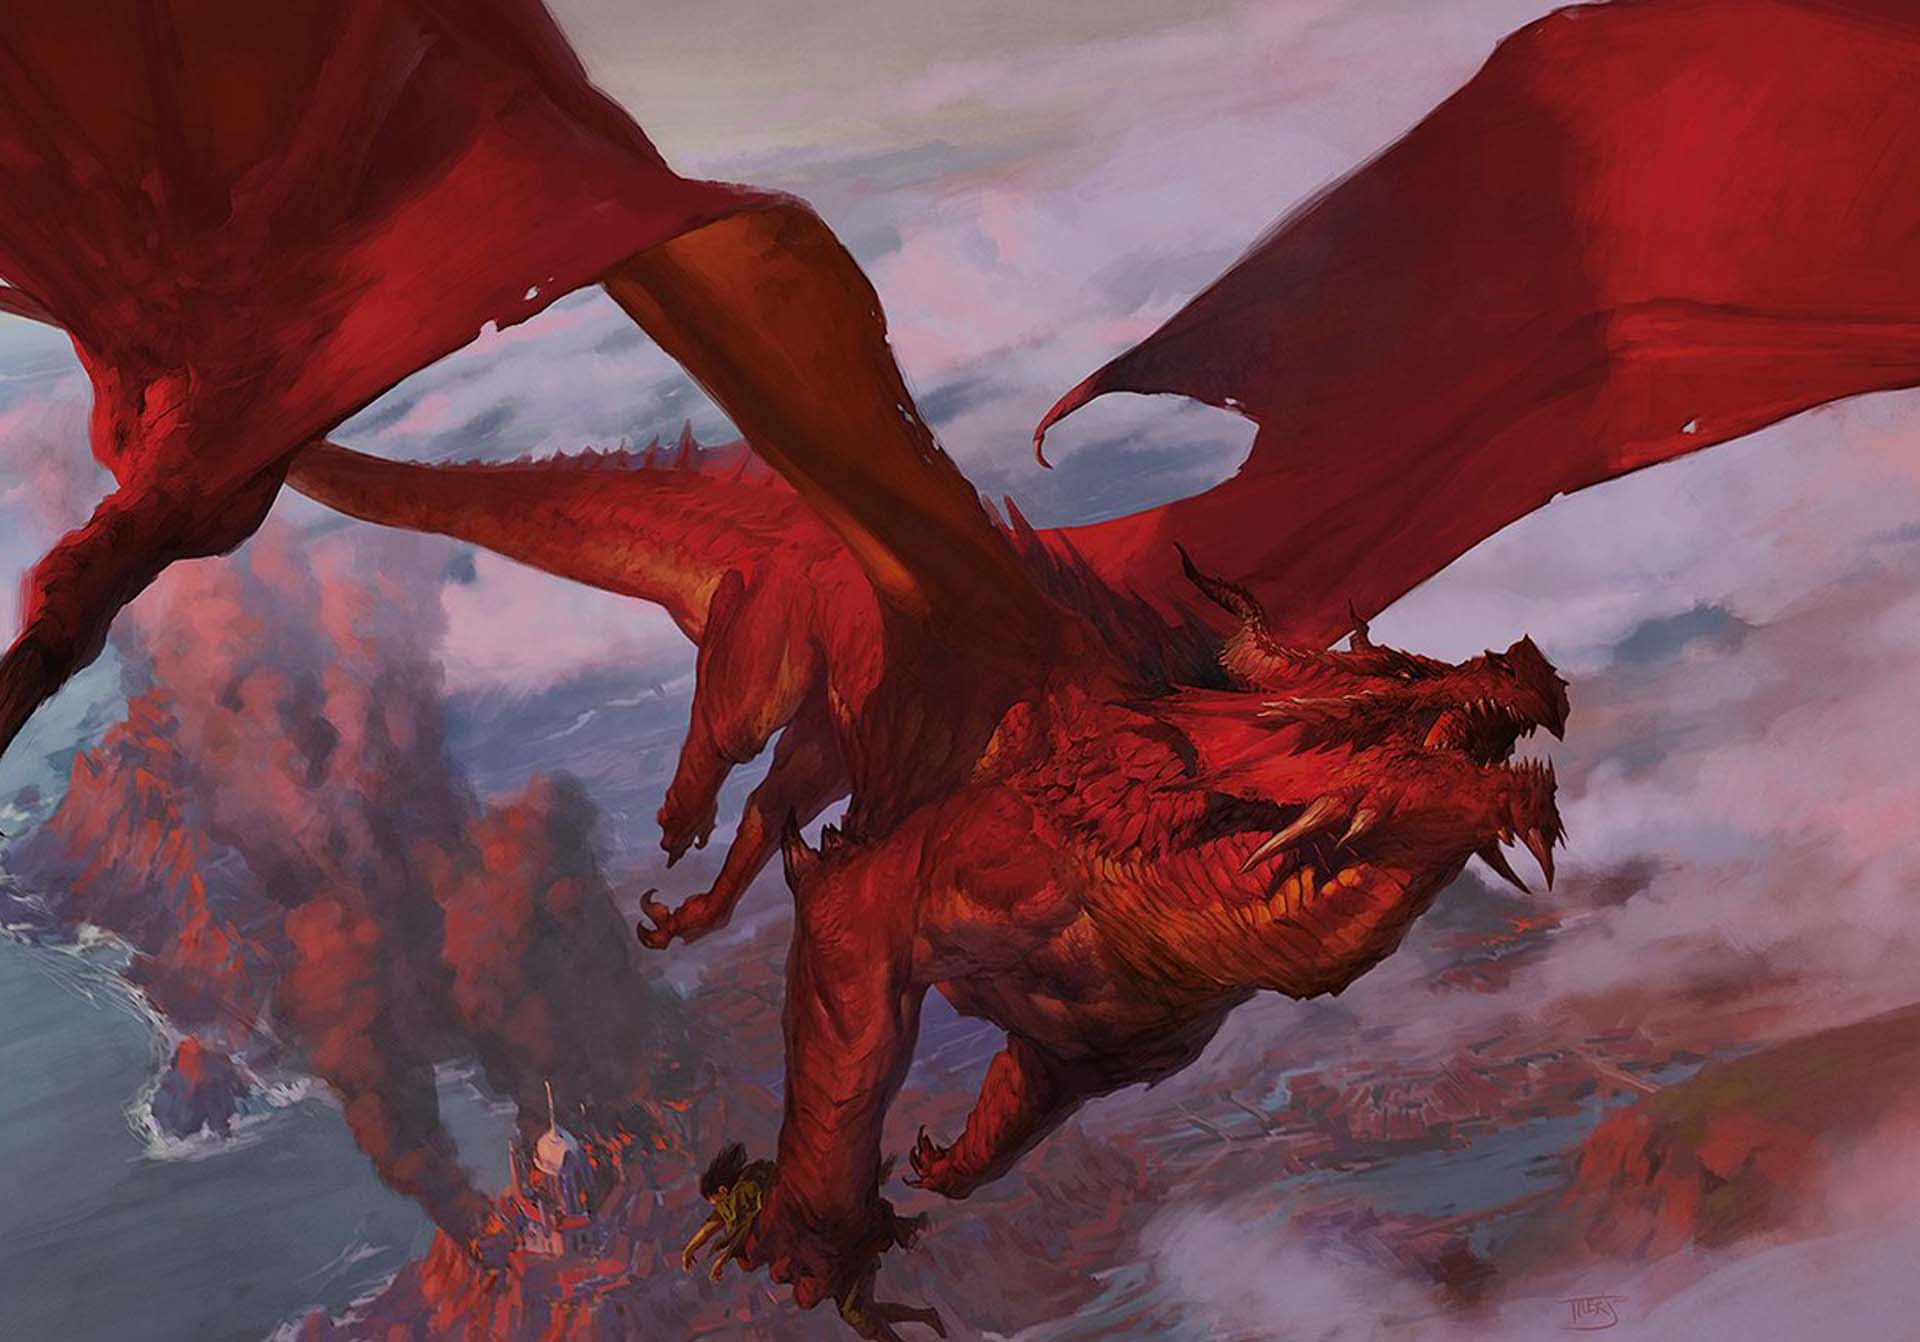 An evil red dragon takes flight!  Photo courtesy of Wizards of the Coast.